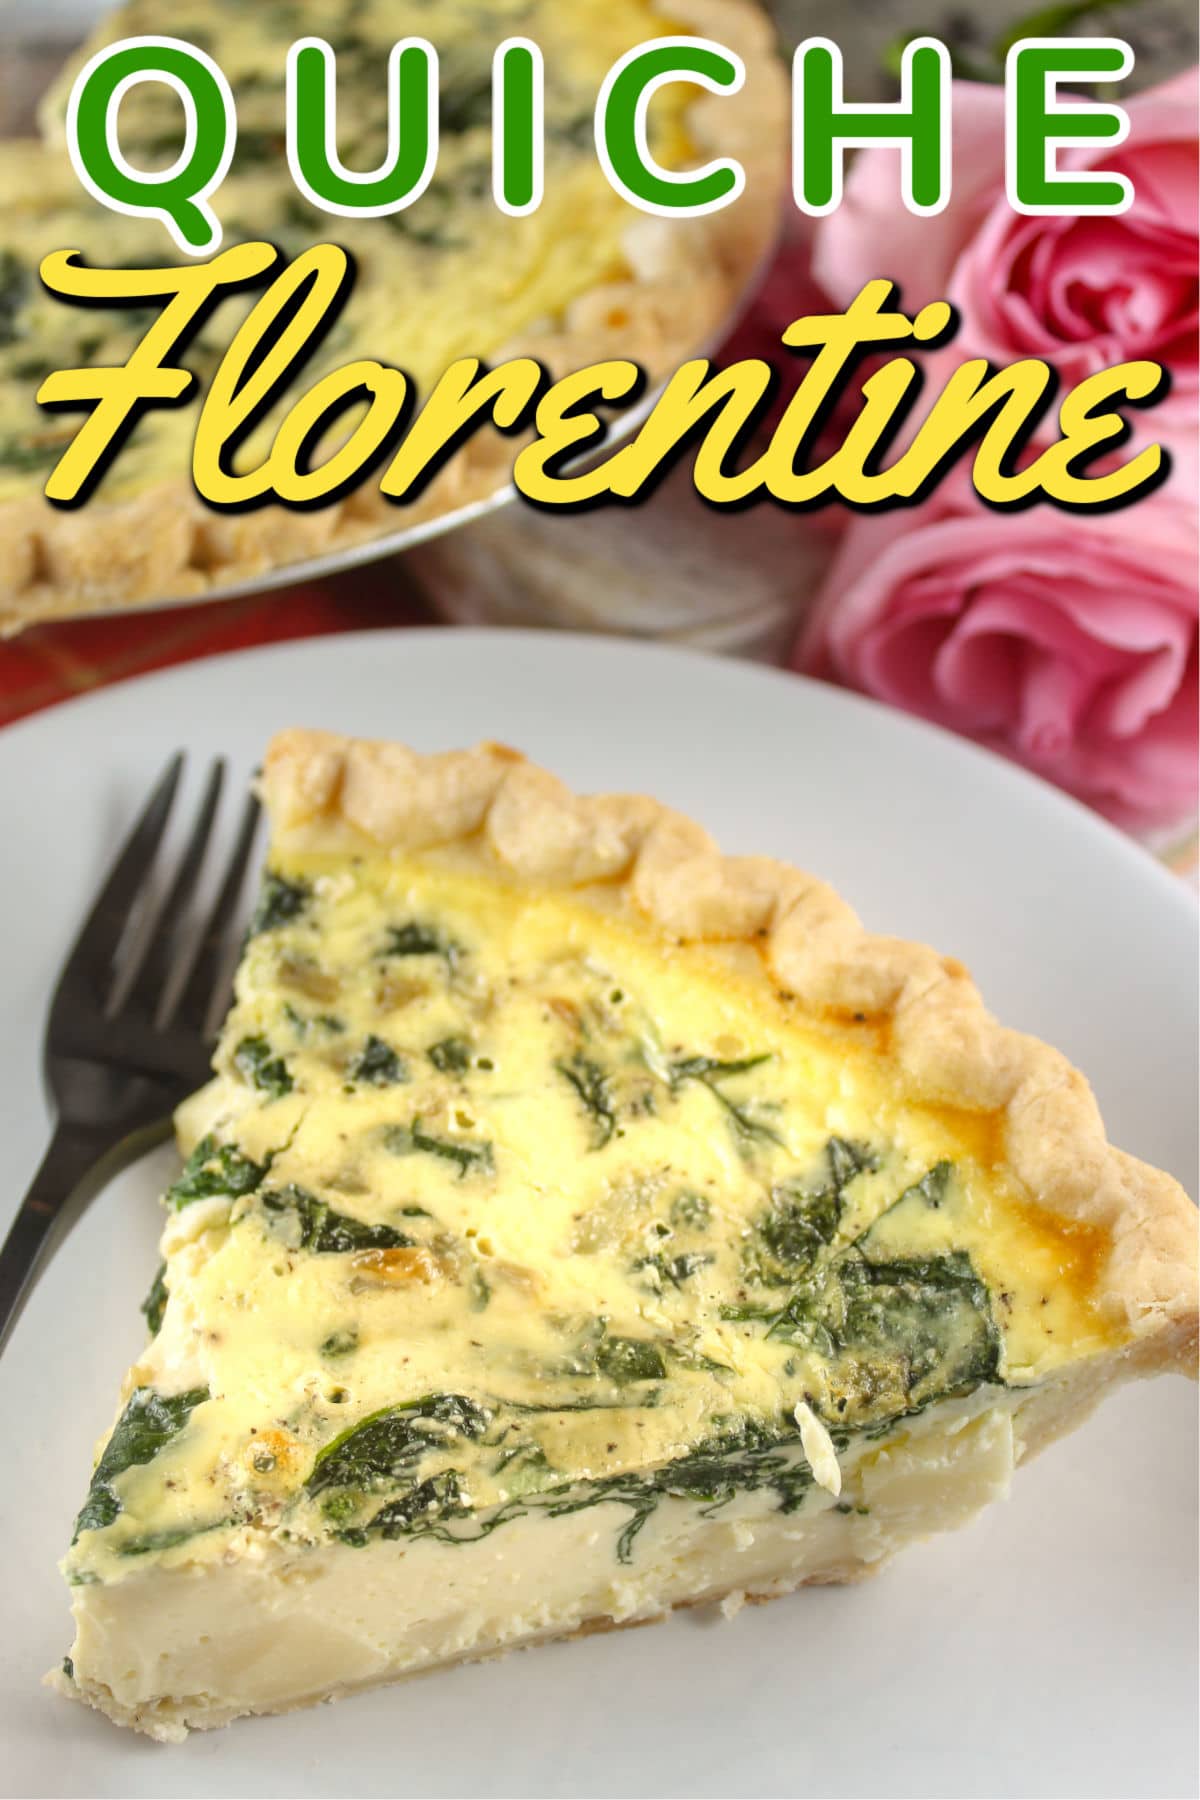 Quiche Florentine is a fancy way of saying spinach quiche and let me tell you - it's a fancy way of saying delicious! I'm normally a meat and cheese girl when it comes to quiche but this delicate dish with sautéed spinach and onions on top of Swiss cheese won me over! via @foodhussy